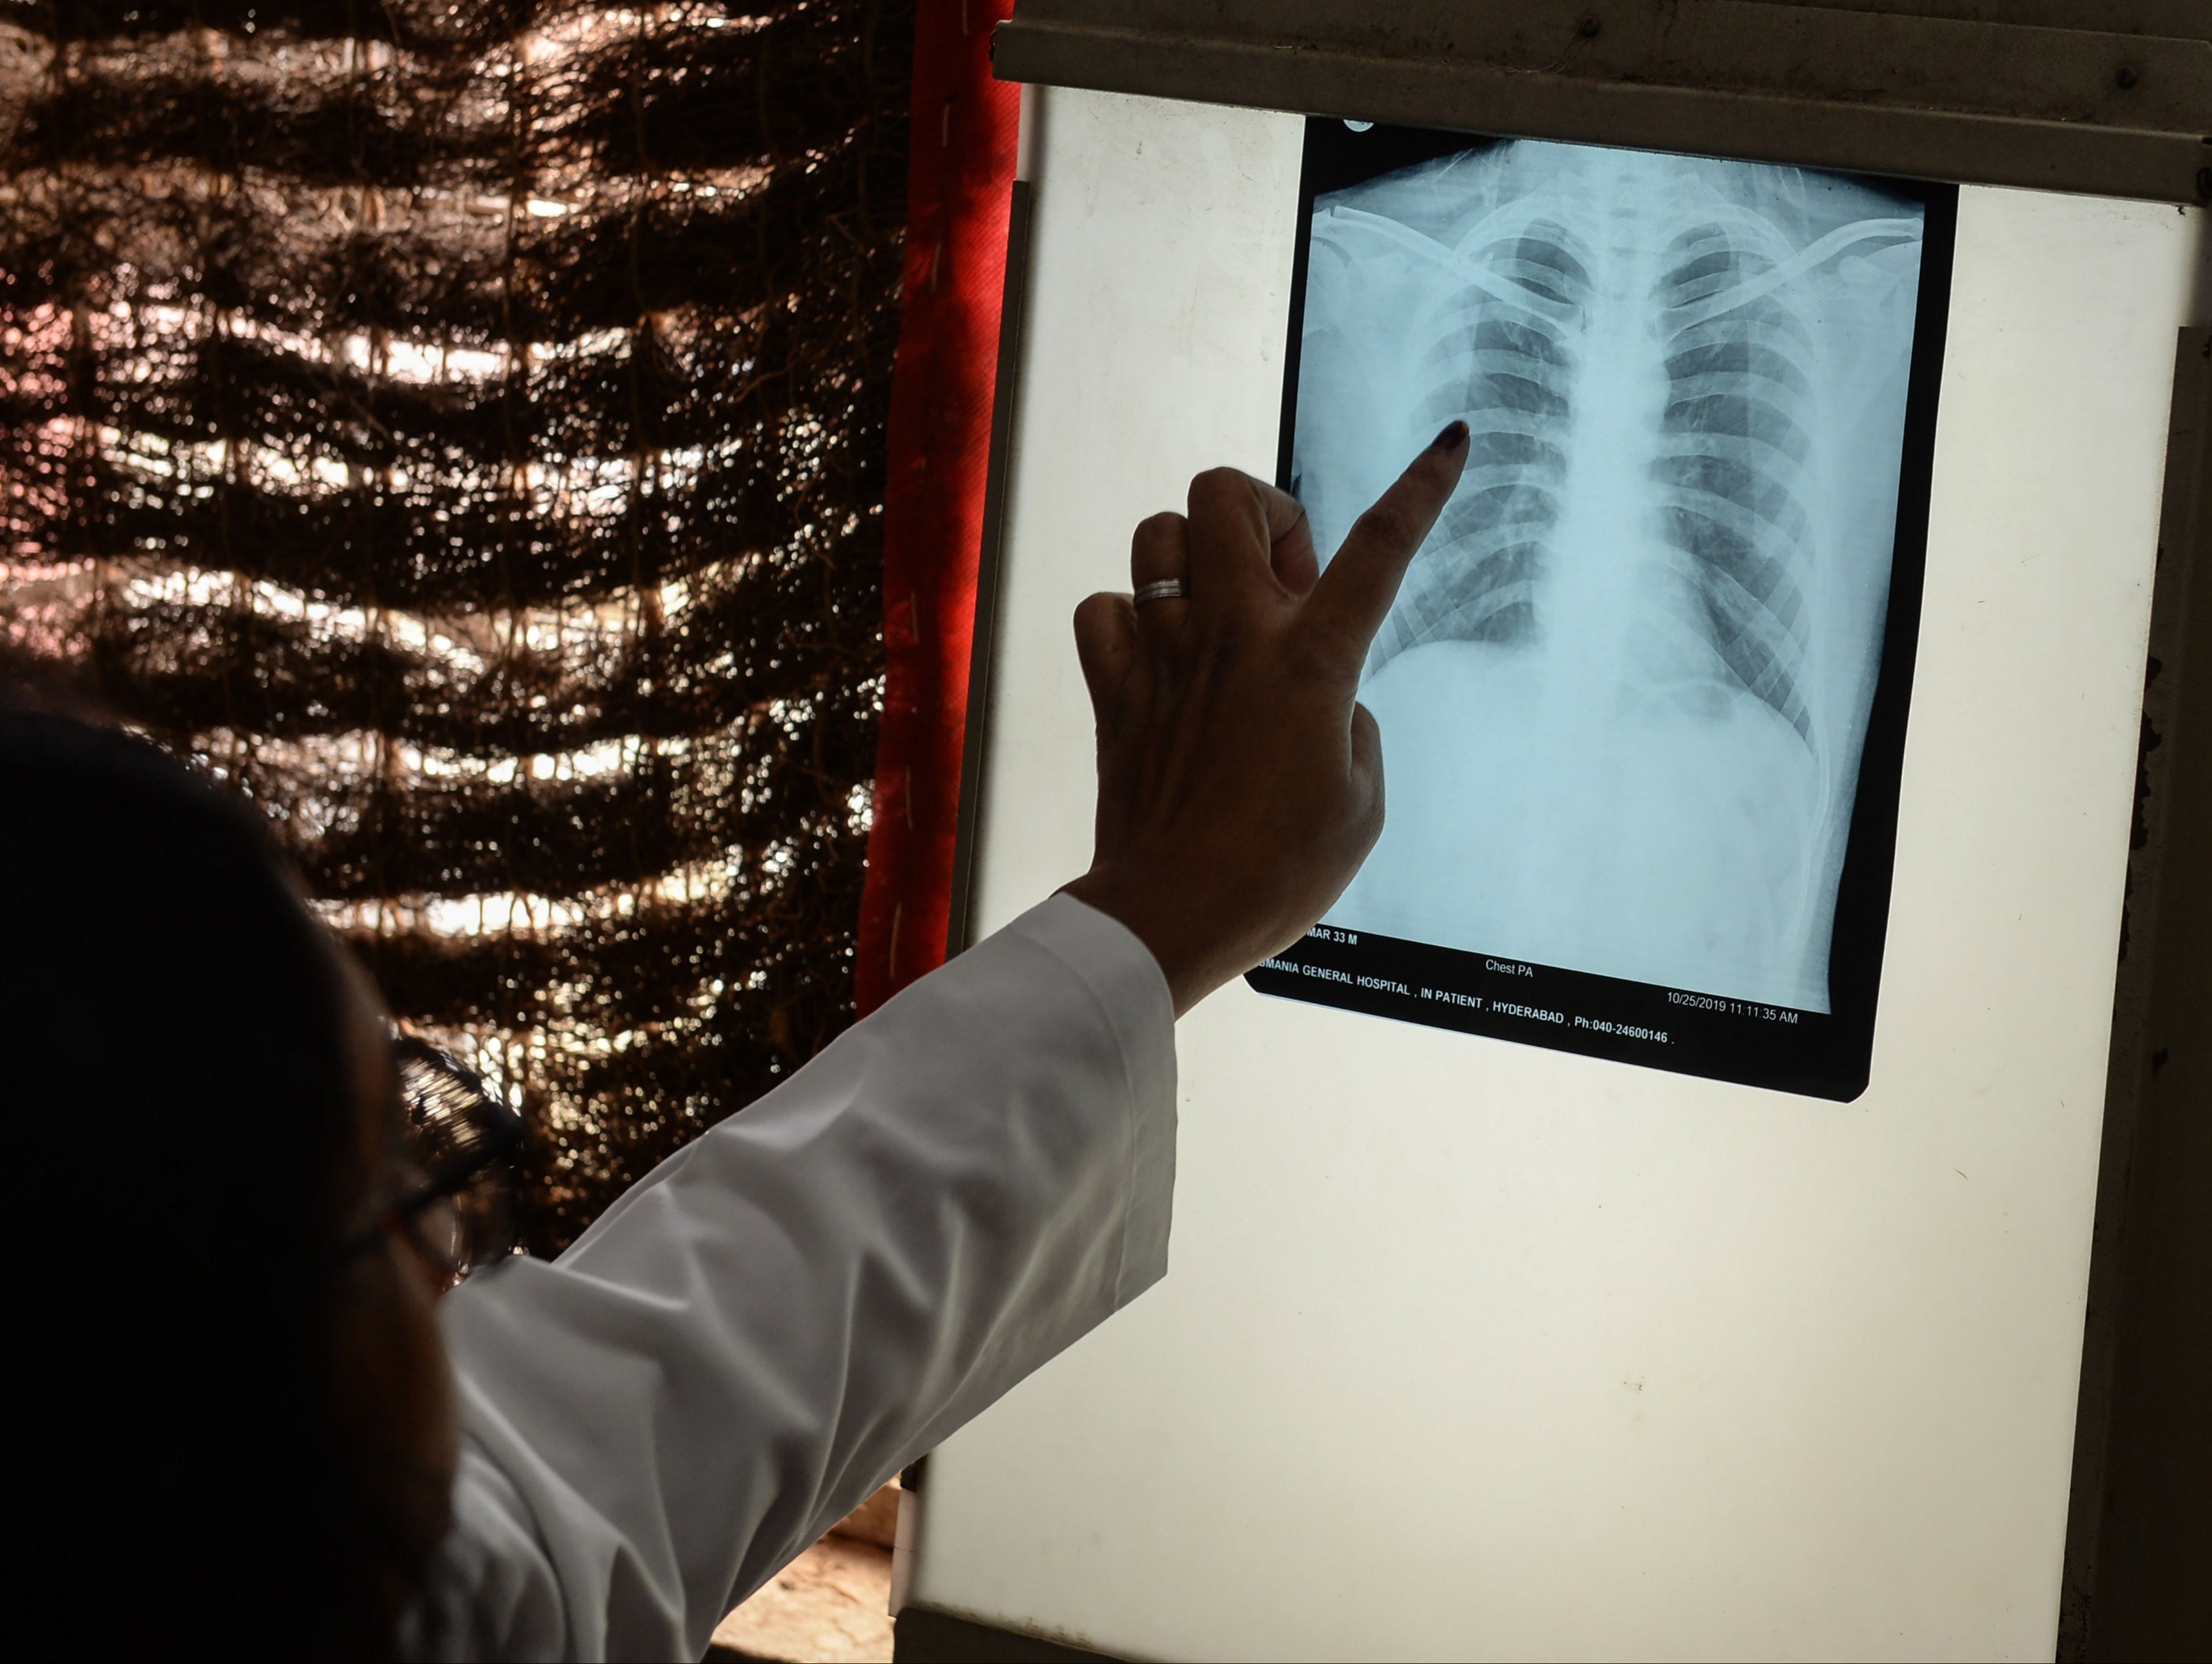 Some 1.5 million people died from TB in 2020, up from 1.4 million in the previous year